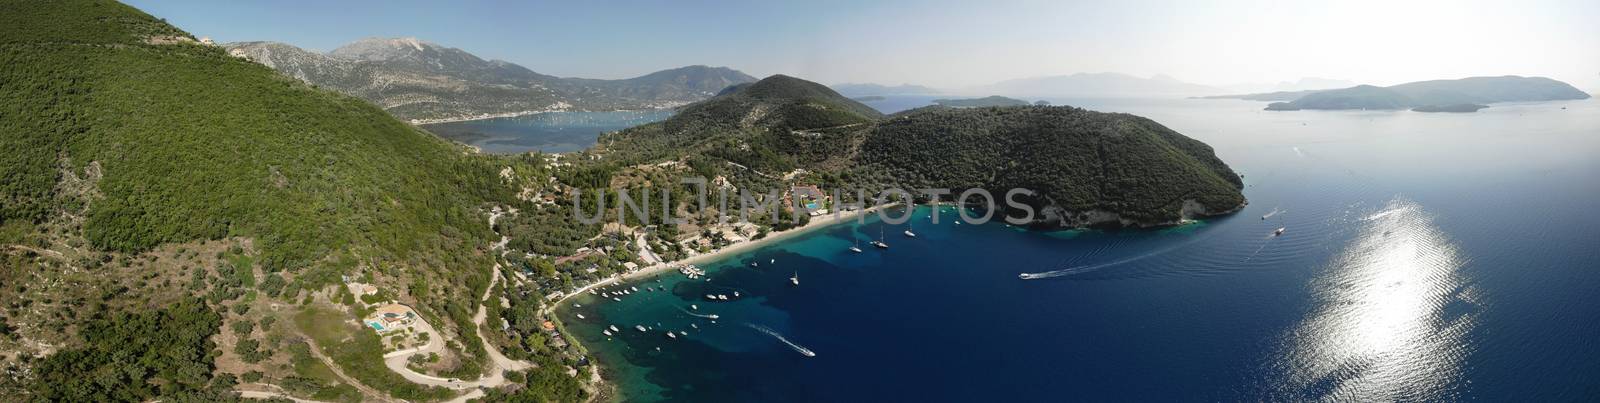 Desimi Beach Golf and nearby Island with clear water in Greece in summer.